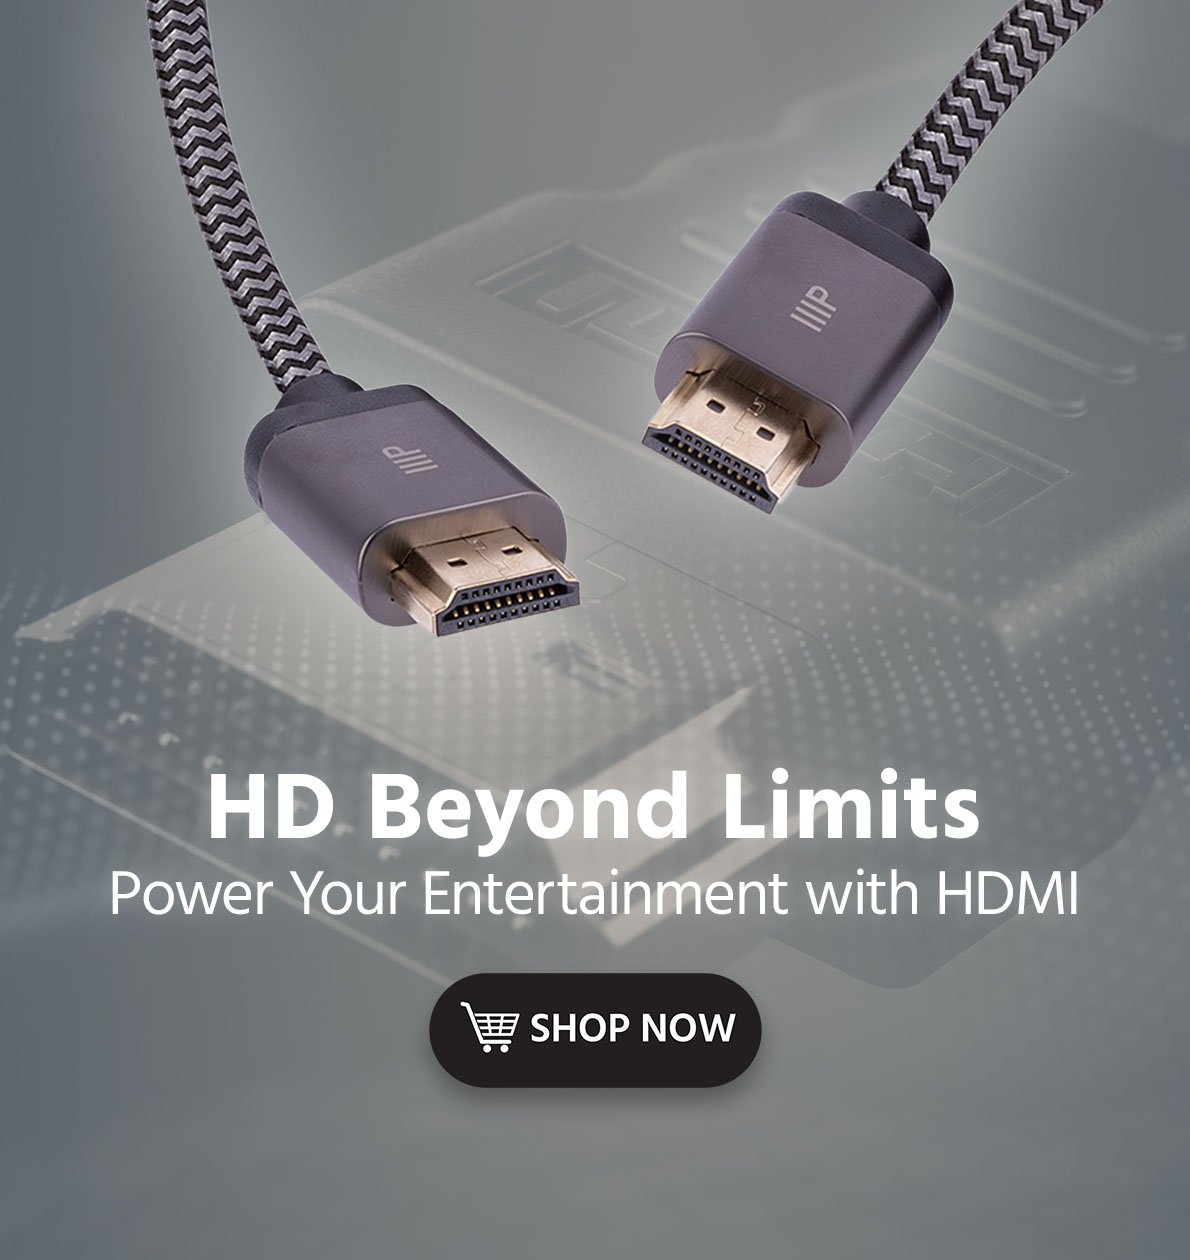 USB to HDMI - Buy USB to HDMI at Best Prices in India